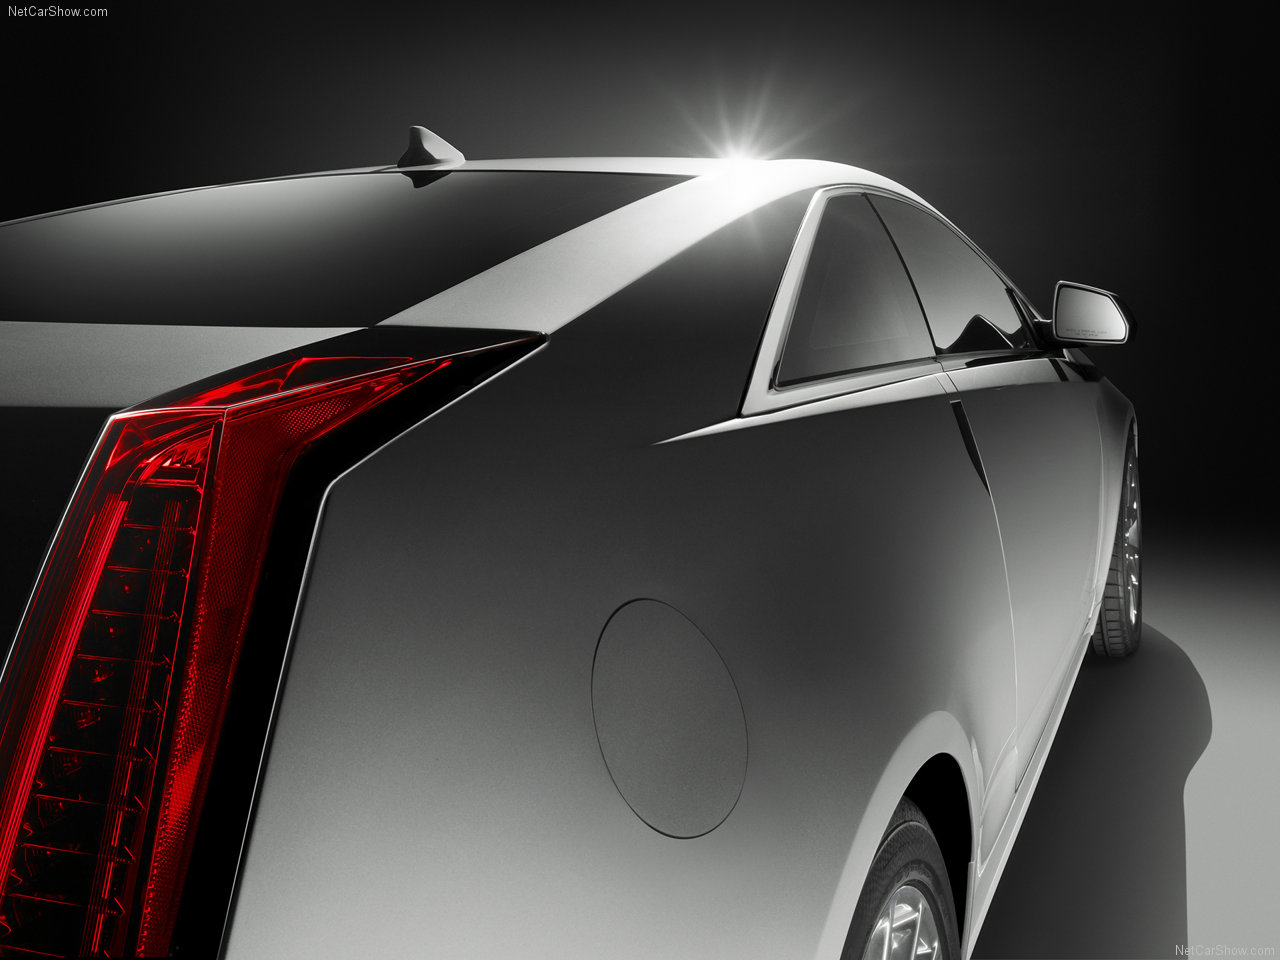 Cadillac CTS Coupe 2011 Cadillac-CTS_Coupe-2011-1280-27